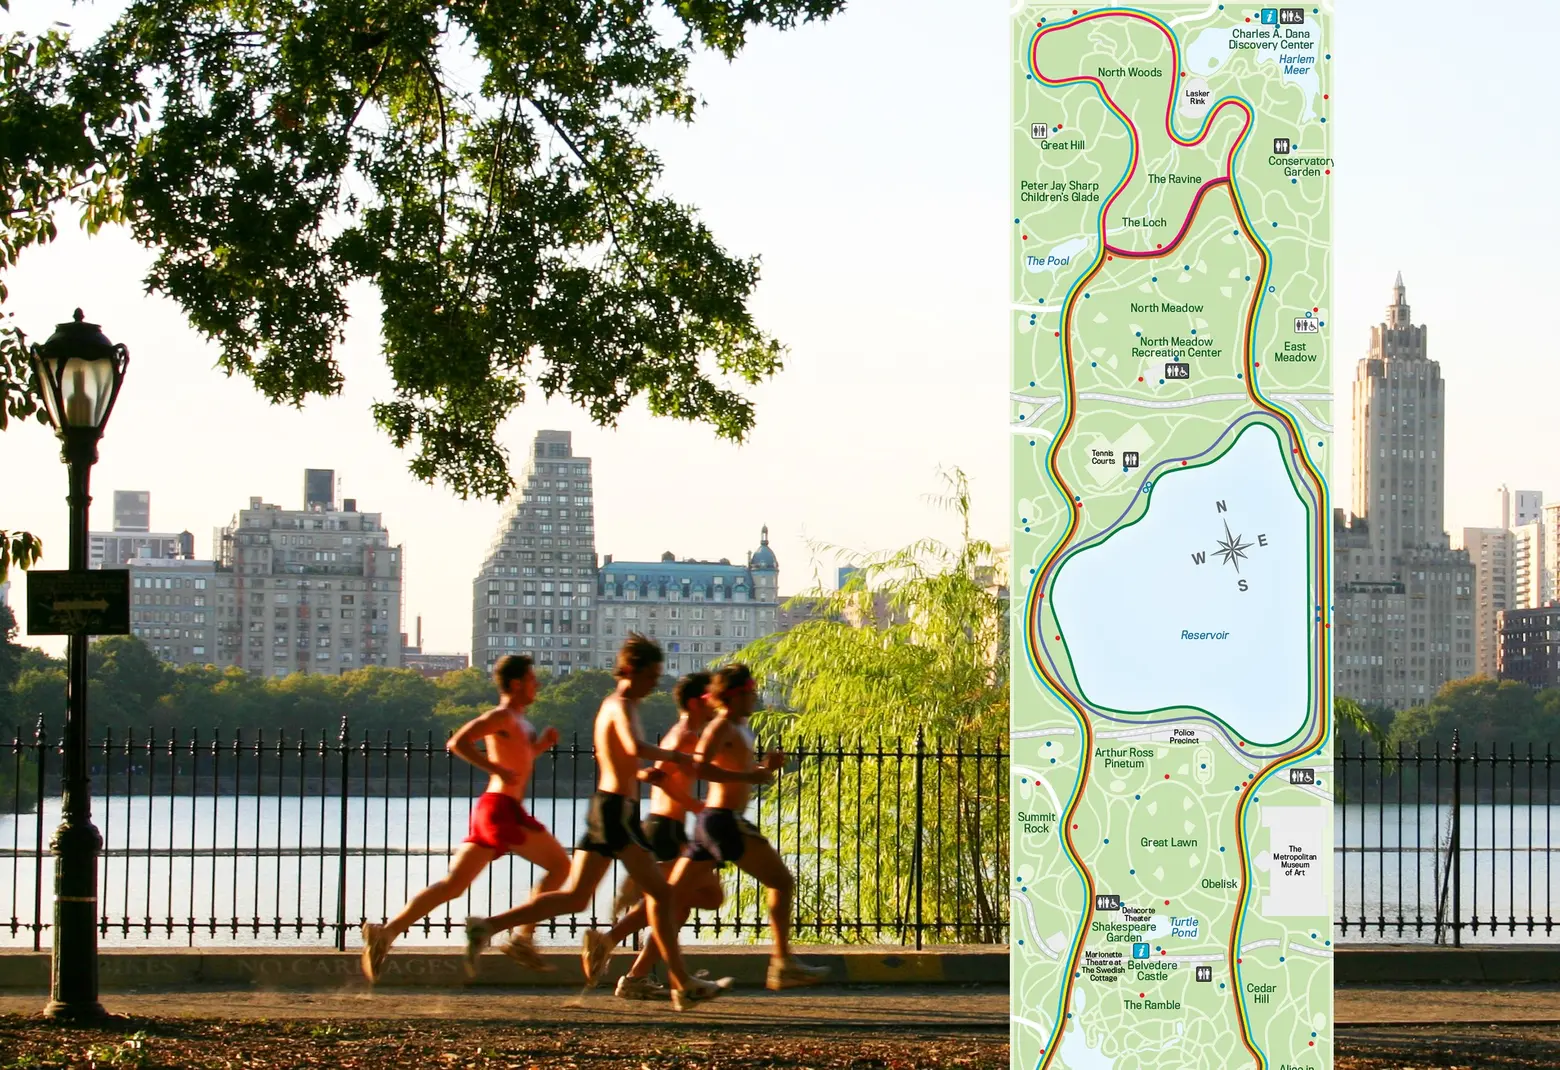 MAP: The best loops and trails for running in Central Park